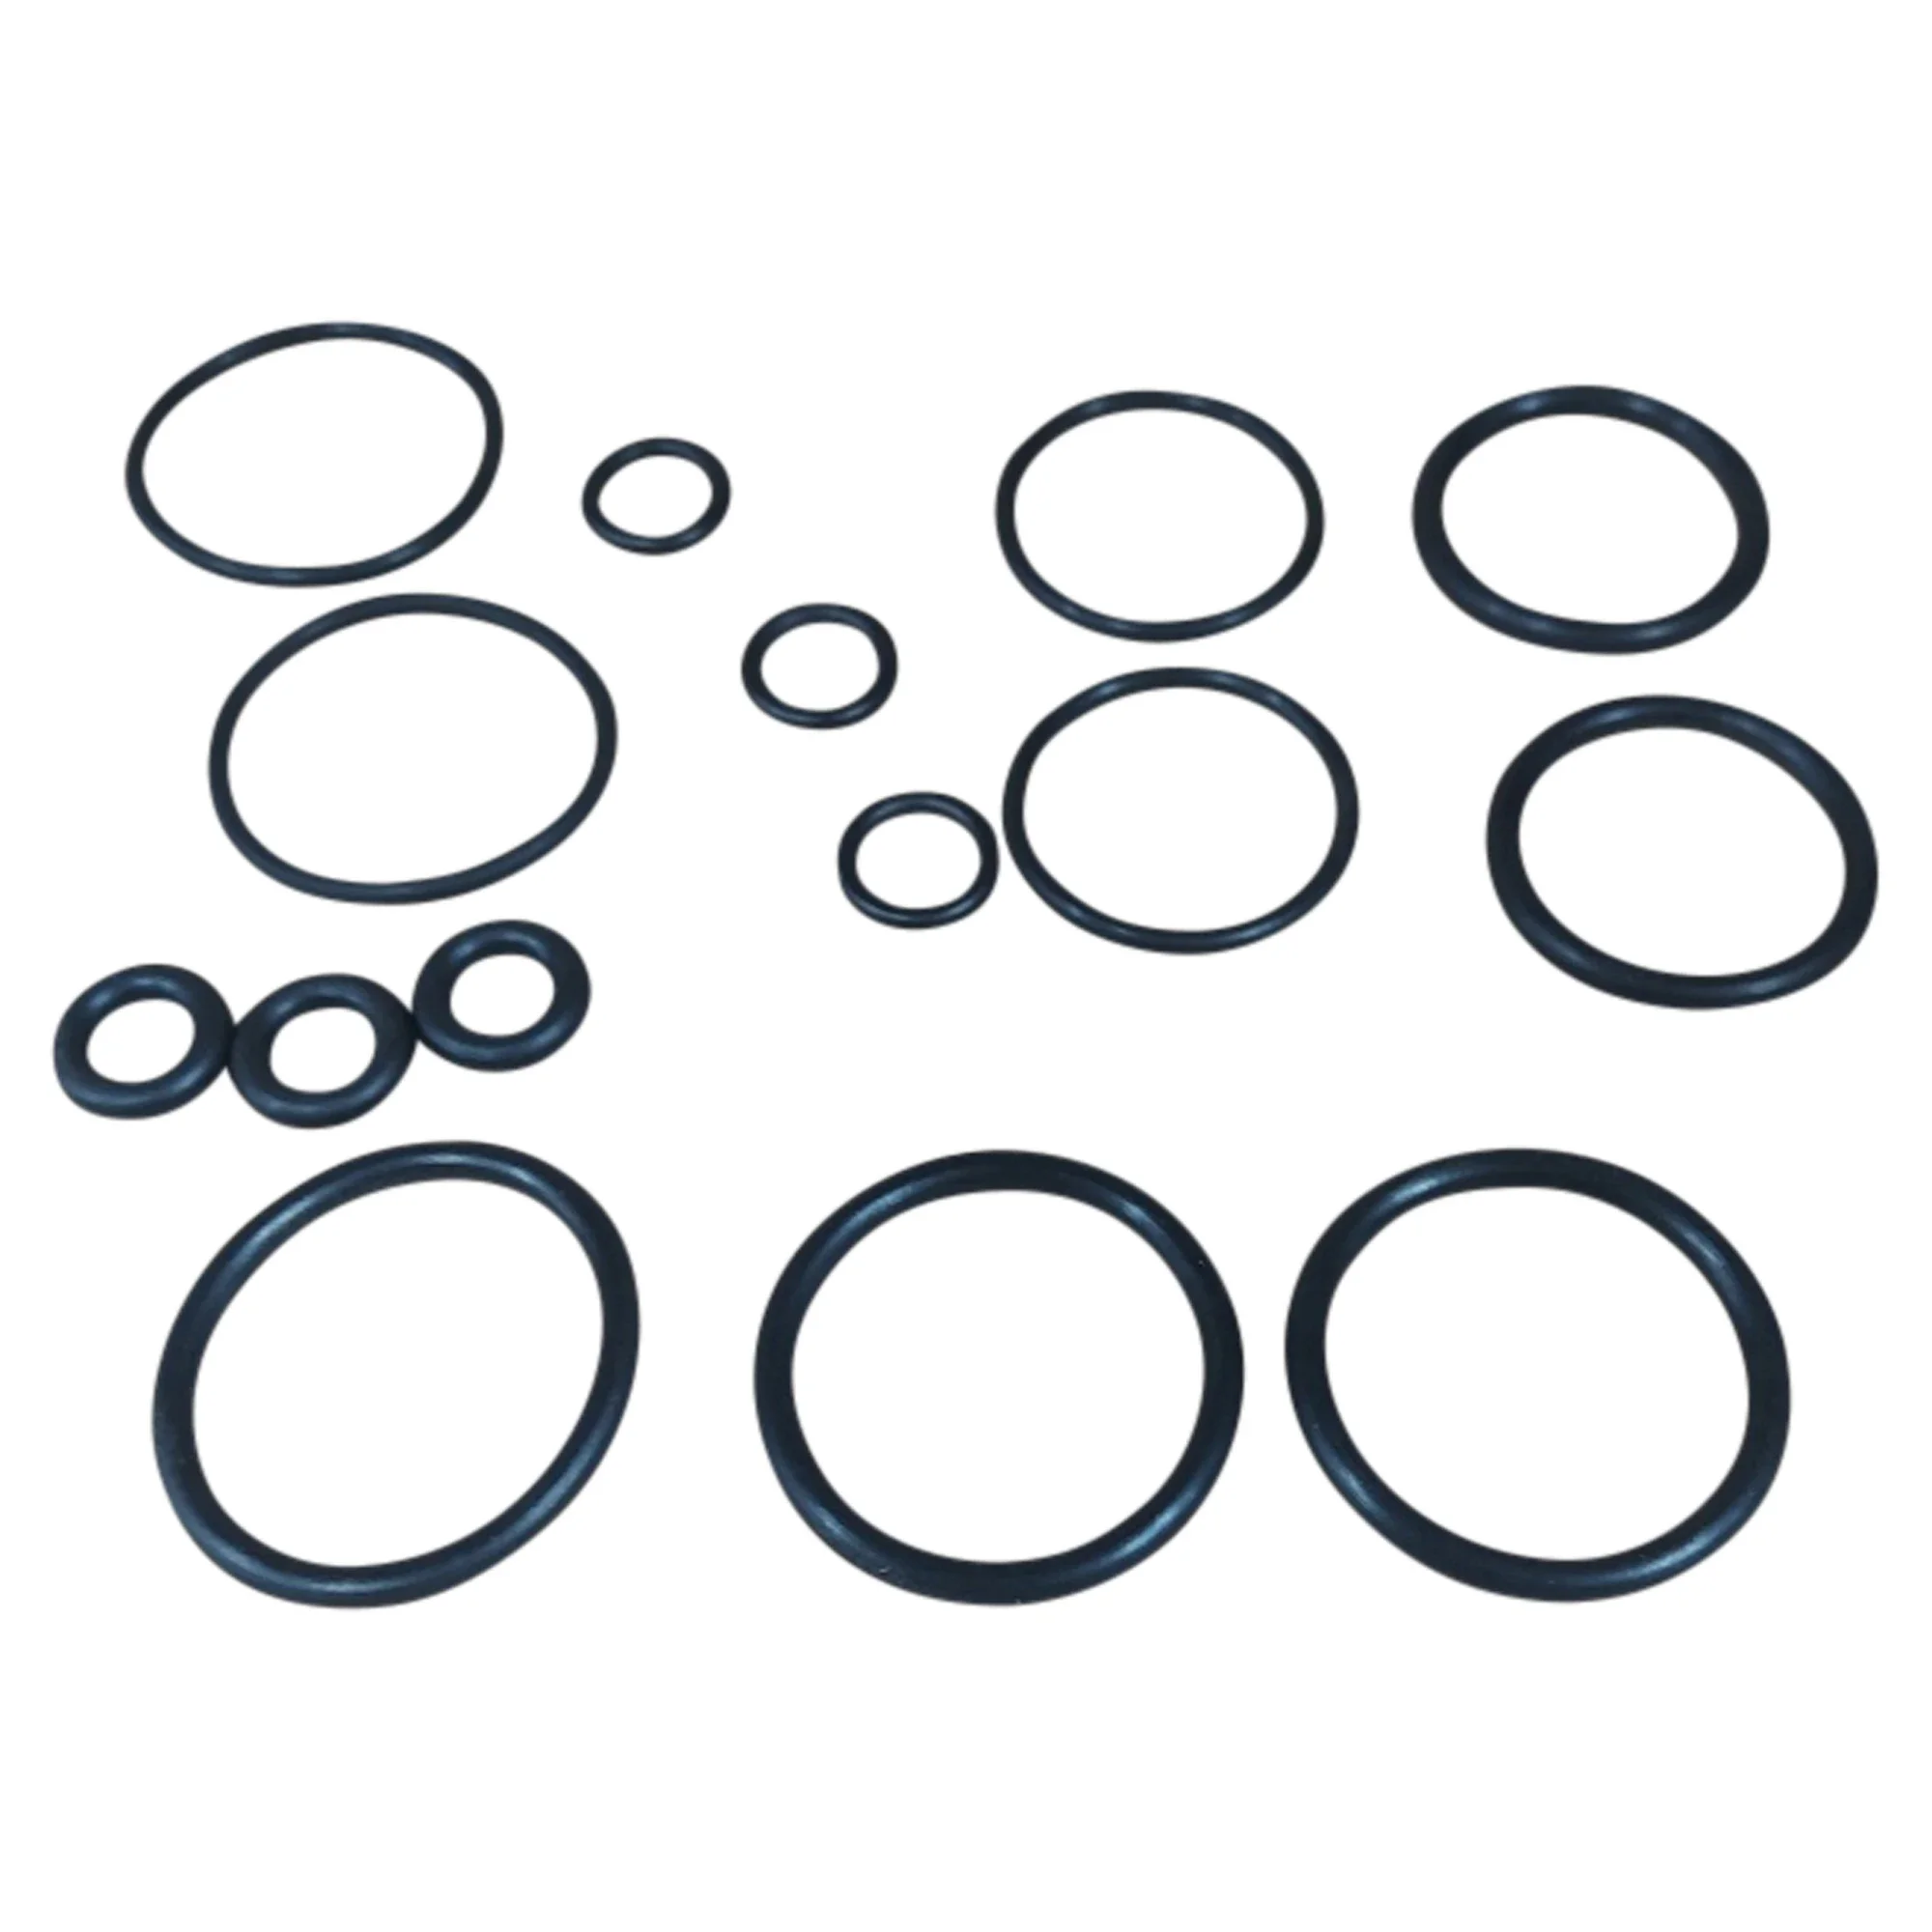 Wastebuilt® Replacement for Wayne Engineering Seal Kit Per Section